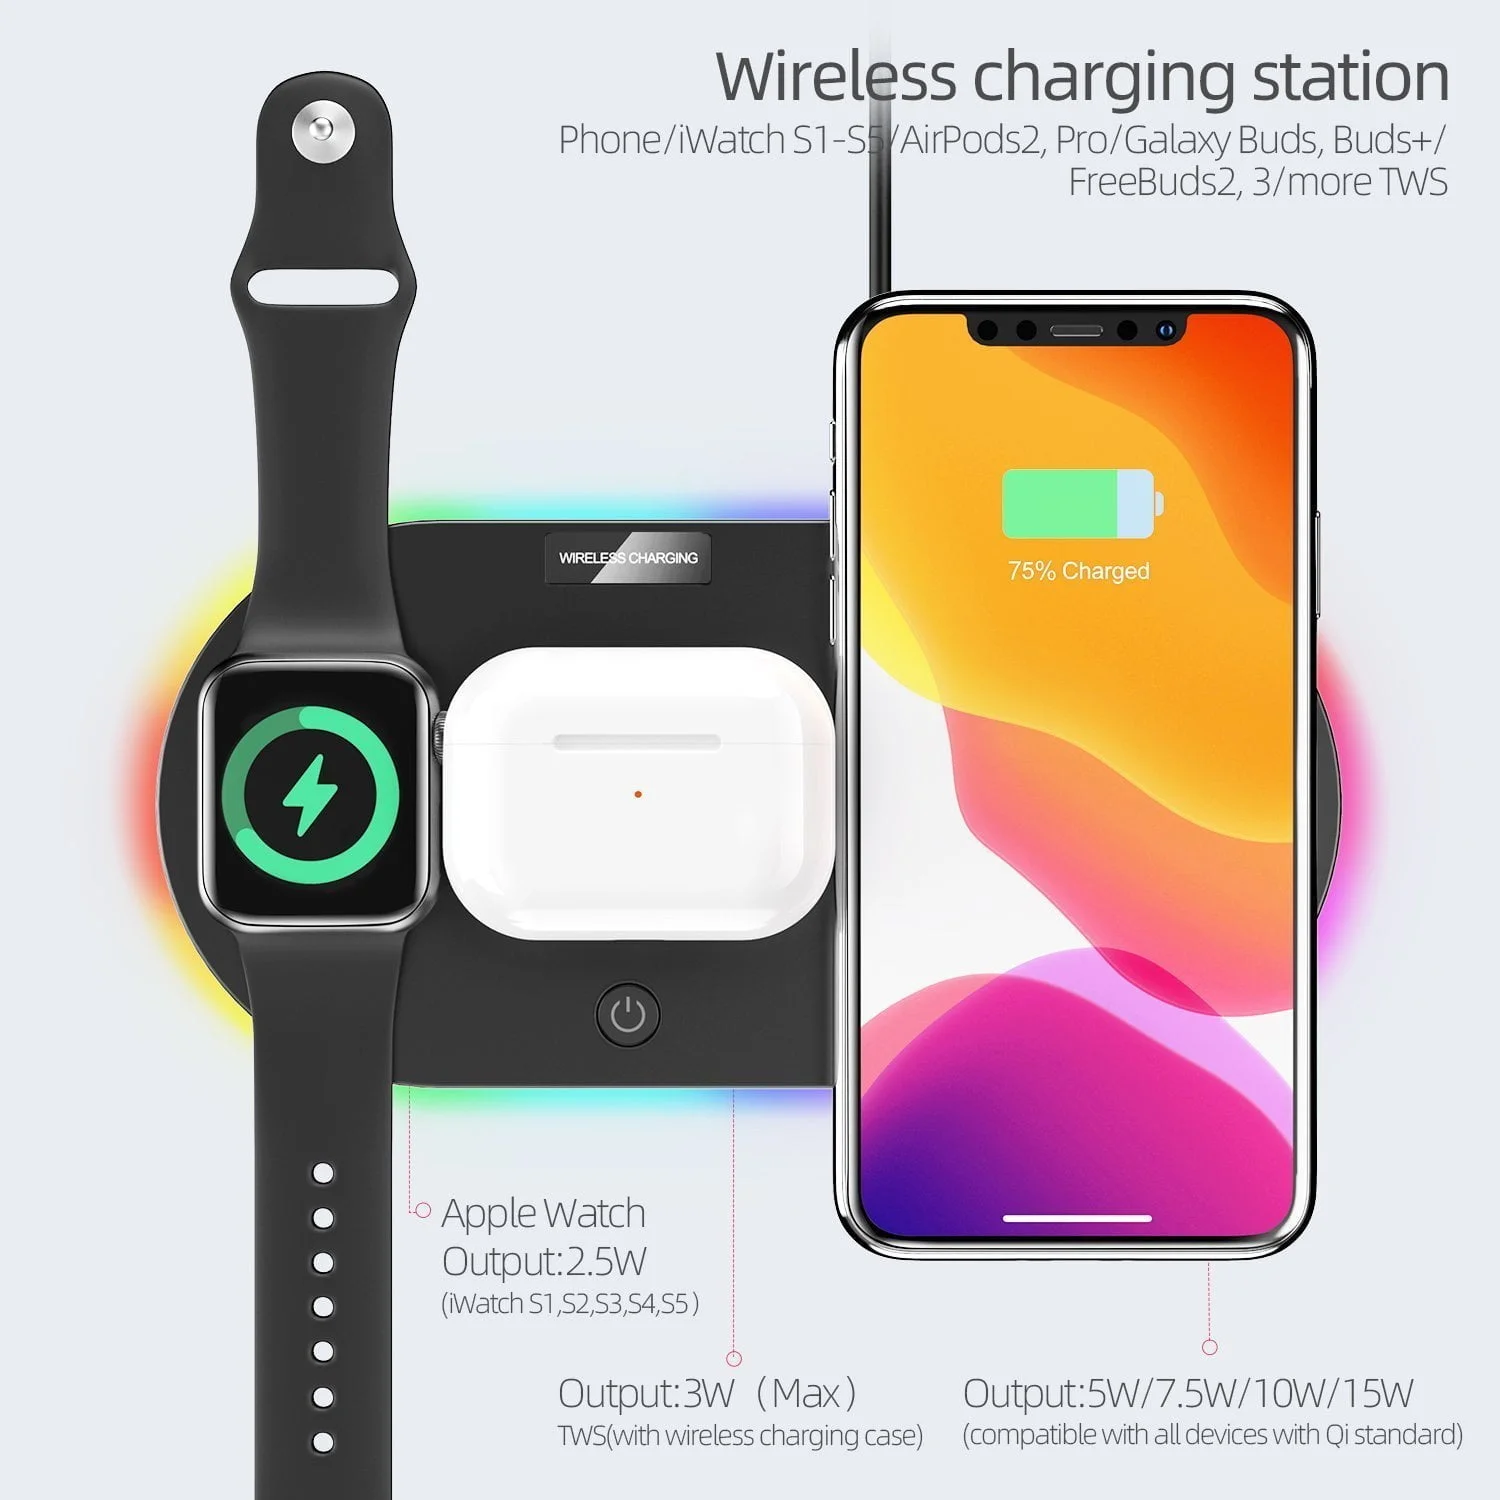 charge your device with 4 in 1 wireless charging station